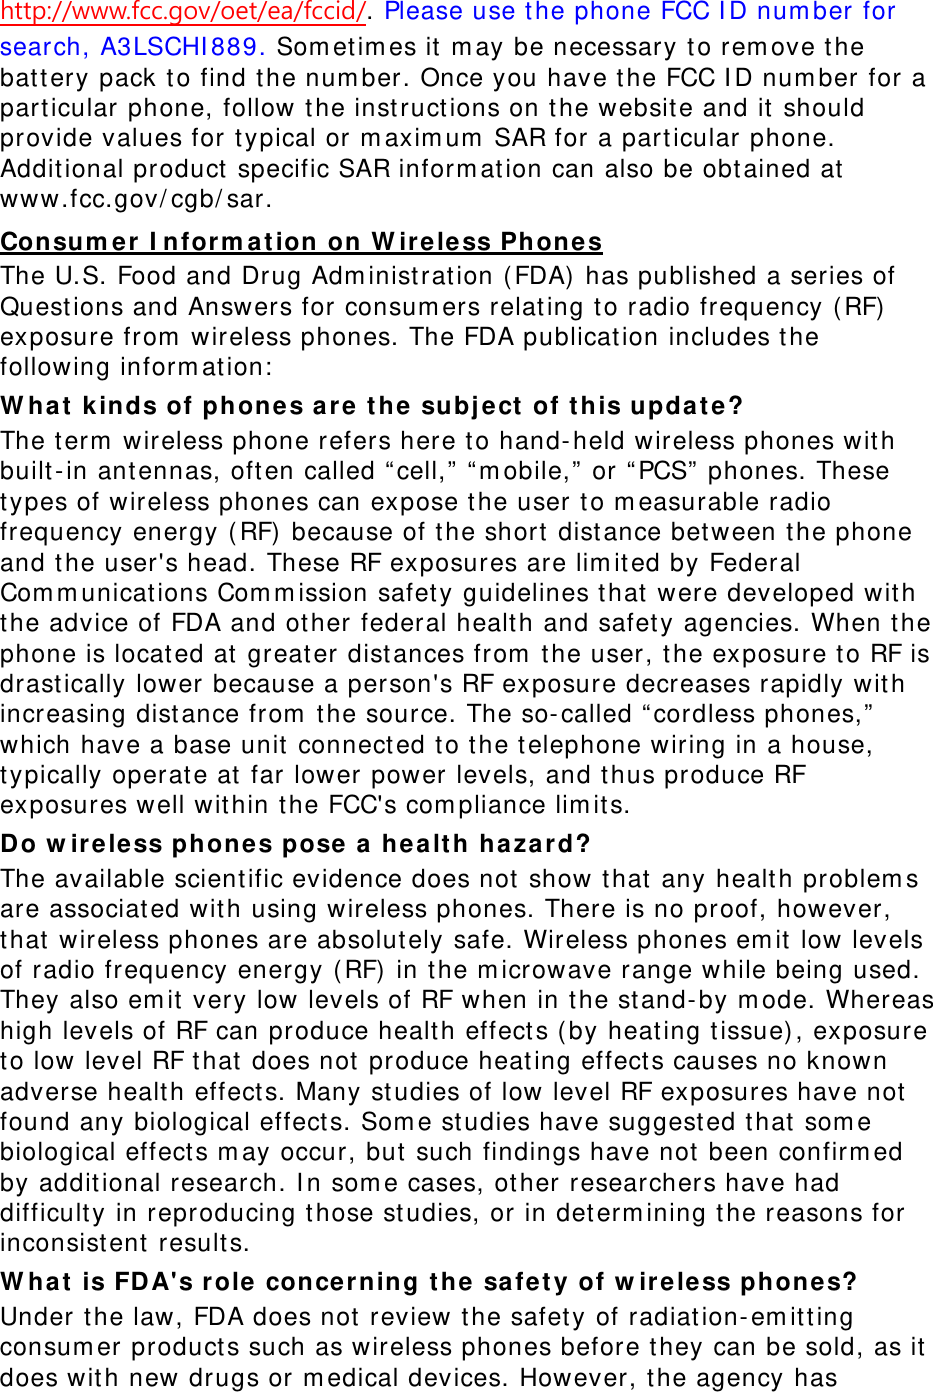 http://www.fcc.gov/oet/ea/fccid/. Please use t he phone FCC I D num ber for search, A3LSCHI 889. Som et im es it  m ay be necessary t o rem ove t he batt ery pack t o find t he num ber. Once you have t he FCC I D num ber for a part icular phone, follow t he instruct ions on t he website and it  should provide values for t ypical or m axim um  SAR for a particular phone. Addit ional product specific SAR inform at ion can also be obt ained at www.fcc.gov/ cgb/ sar. Consum e r I nform a t ion on W ir e le ss Phone s The U.S. Food and Drug Adm inist ration ( FDA)  has published a series of Quest ions and Answers for consum ers relat ing to radio frequency ( RF) exposure from  wireless phones. The FDA publicat ion includes t he following inform at ion:  W ha t  k inds of phon e s are t h e  subj ect  of t his upda te? The term  wireless phone refers here t o hand- held wireless phones wit h built - in ant ennas, oft en called “ cell,”  “ m obile,”  or “ PCS”  phones. These types of wireless phones can expose t he user t o m easurable radio frequency energy ( RF) because of the short  dist ance bet ween t he phone and the user&apos;s head. These RF exposures are lim ited by Federal Com m unicat ions Com m ission safet y guidelines t hat were developed wit h the advice of FDA and ot her federal health and safet y agencies. When t he phone is located at  great er dist ances from  the user, t he exposure t o RF is drast ically lower because a person&apos;s RF exposure decreases rapidly wit h increasing dist ance from  the source. The so- called “ cordless phones,”  which have a base unit connected t o the telephone wiring in a house, typically operate at  far lower power levels, and t hus produce RF exposures well wit hin t he FCC&apos;s com pliance lim its. Do w ir e less phone s pose a  healt h  haza r d? The available scient ific evidence does not  show t hat  any healt h problem s are associat ed wit h using wireless phones. There is no proof, however, that  wireless phones are absolut ely safe. Wireless phones em it  low levels of radio frequency energy ( RF)  in t he m icrowave range while being used. They also em it  very low levels of RF when in the st and- by m ode. Whereas high levels of RF can produce healt h effects ( by heat ing t issue) , exposure to low level RF that  does not  produce heat ing effect s causes no known adverse healt h effect s. Many st udies of low level RF exposures have not  found any biological effect s. Som e st udies have suggest ed that som e biological effects m ay occur, but  such findings have not  been confirm ed by addit ional research. I n som e cases, ot her researchers have had difficult y in reproducing t hose st udies, or in det erm ining t he reasons for inconsistent  results. W ha t  is FDA&apos;s r ole concerning t he safet y of w ireless phones? Under t he law, FDA does not  review t he safet y of radiat ion- em itt ing consum er product s such as wireless phones before they can be sold, as it  does wit h new drugs or m edical devices. However, t he agency has 